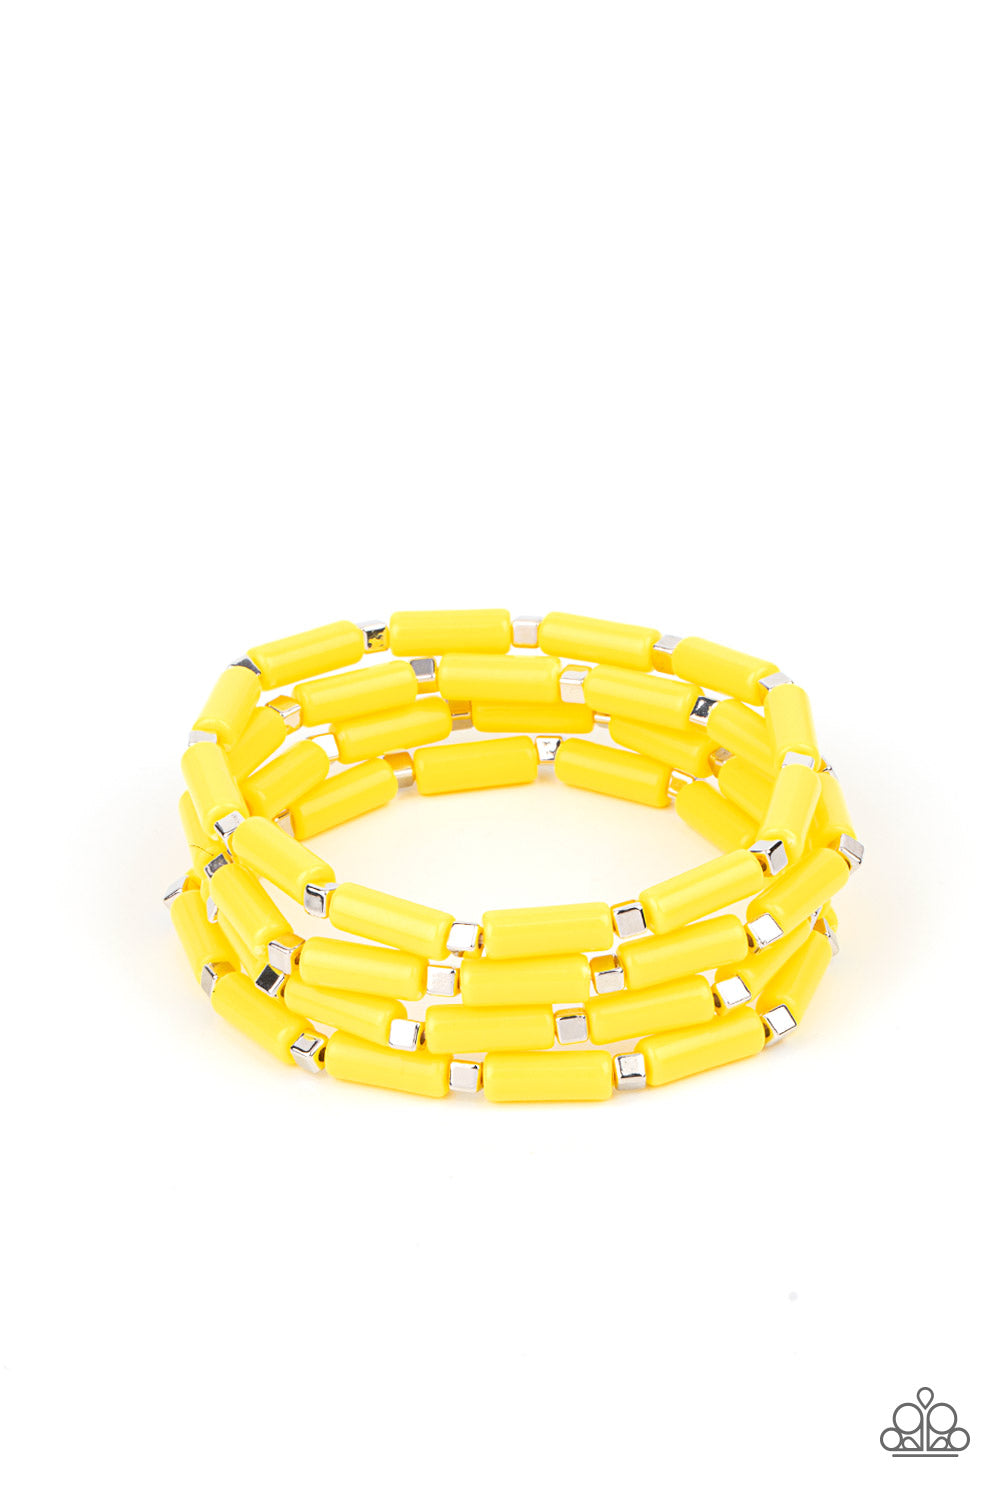 Radiantly Retro Yellow Bracelet - Paparazzi Accessories  A playful collection of dainty silver cube beads and cylindrical Illuminating beads are threaded along stretchy bands, creating colorful layers around the wrist.  All Paparazzi Accessories are lead free and nickel free!  Sold as one set of four bracelets.